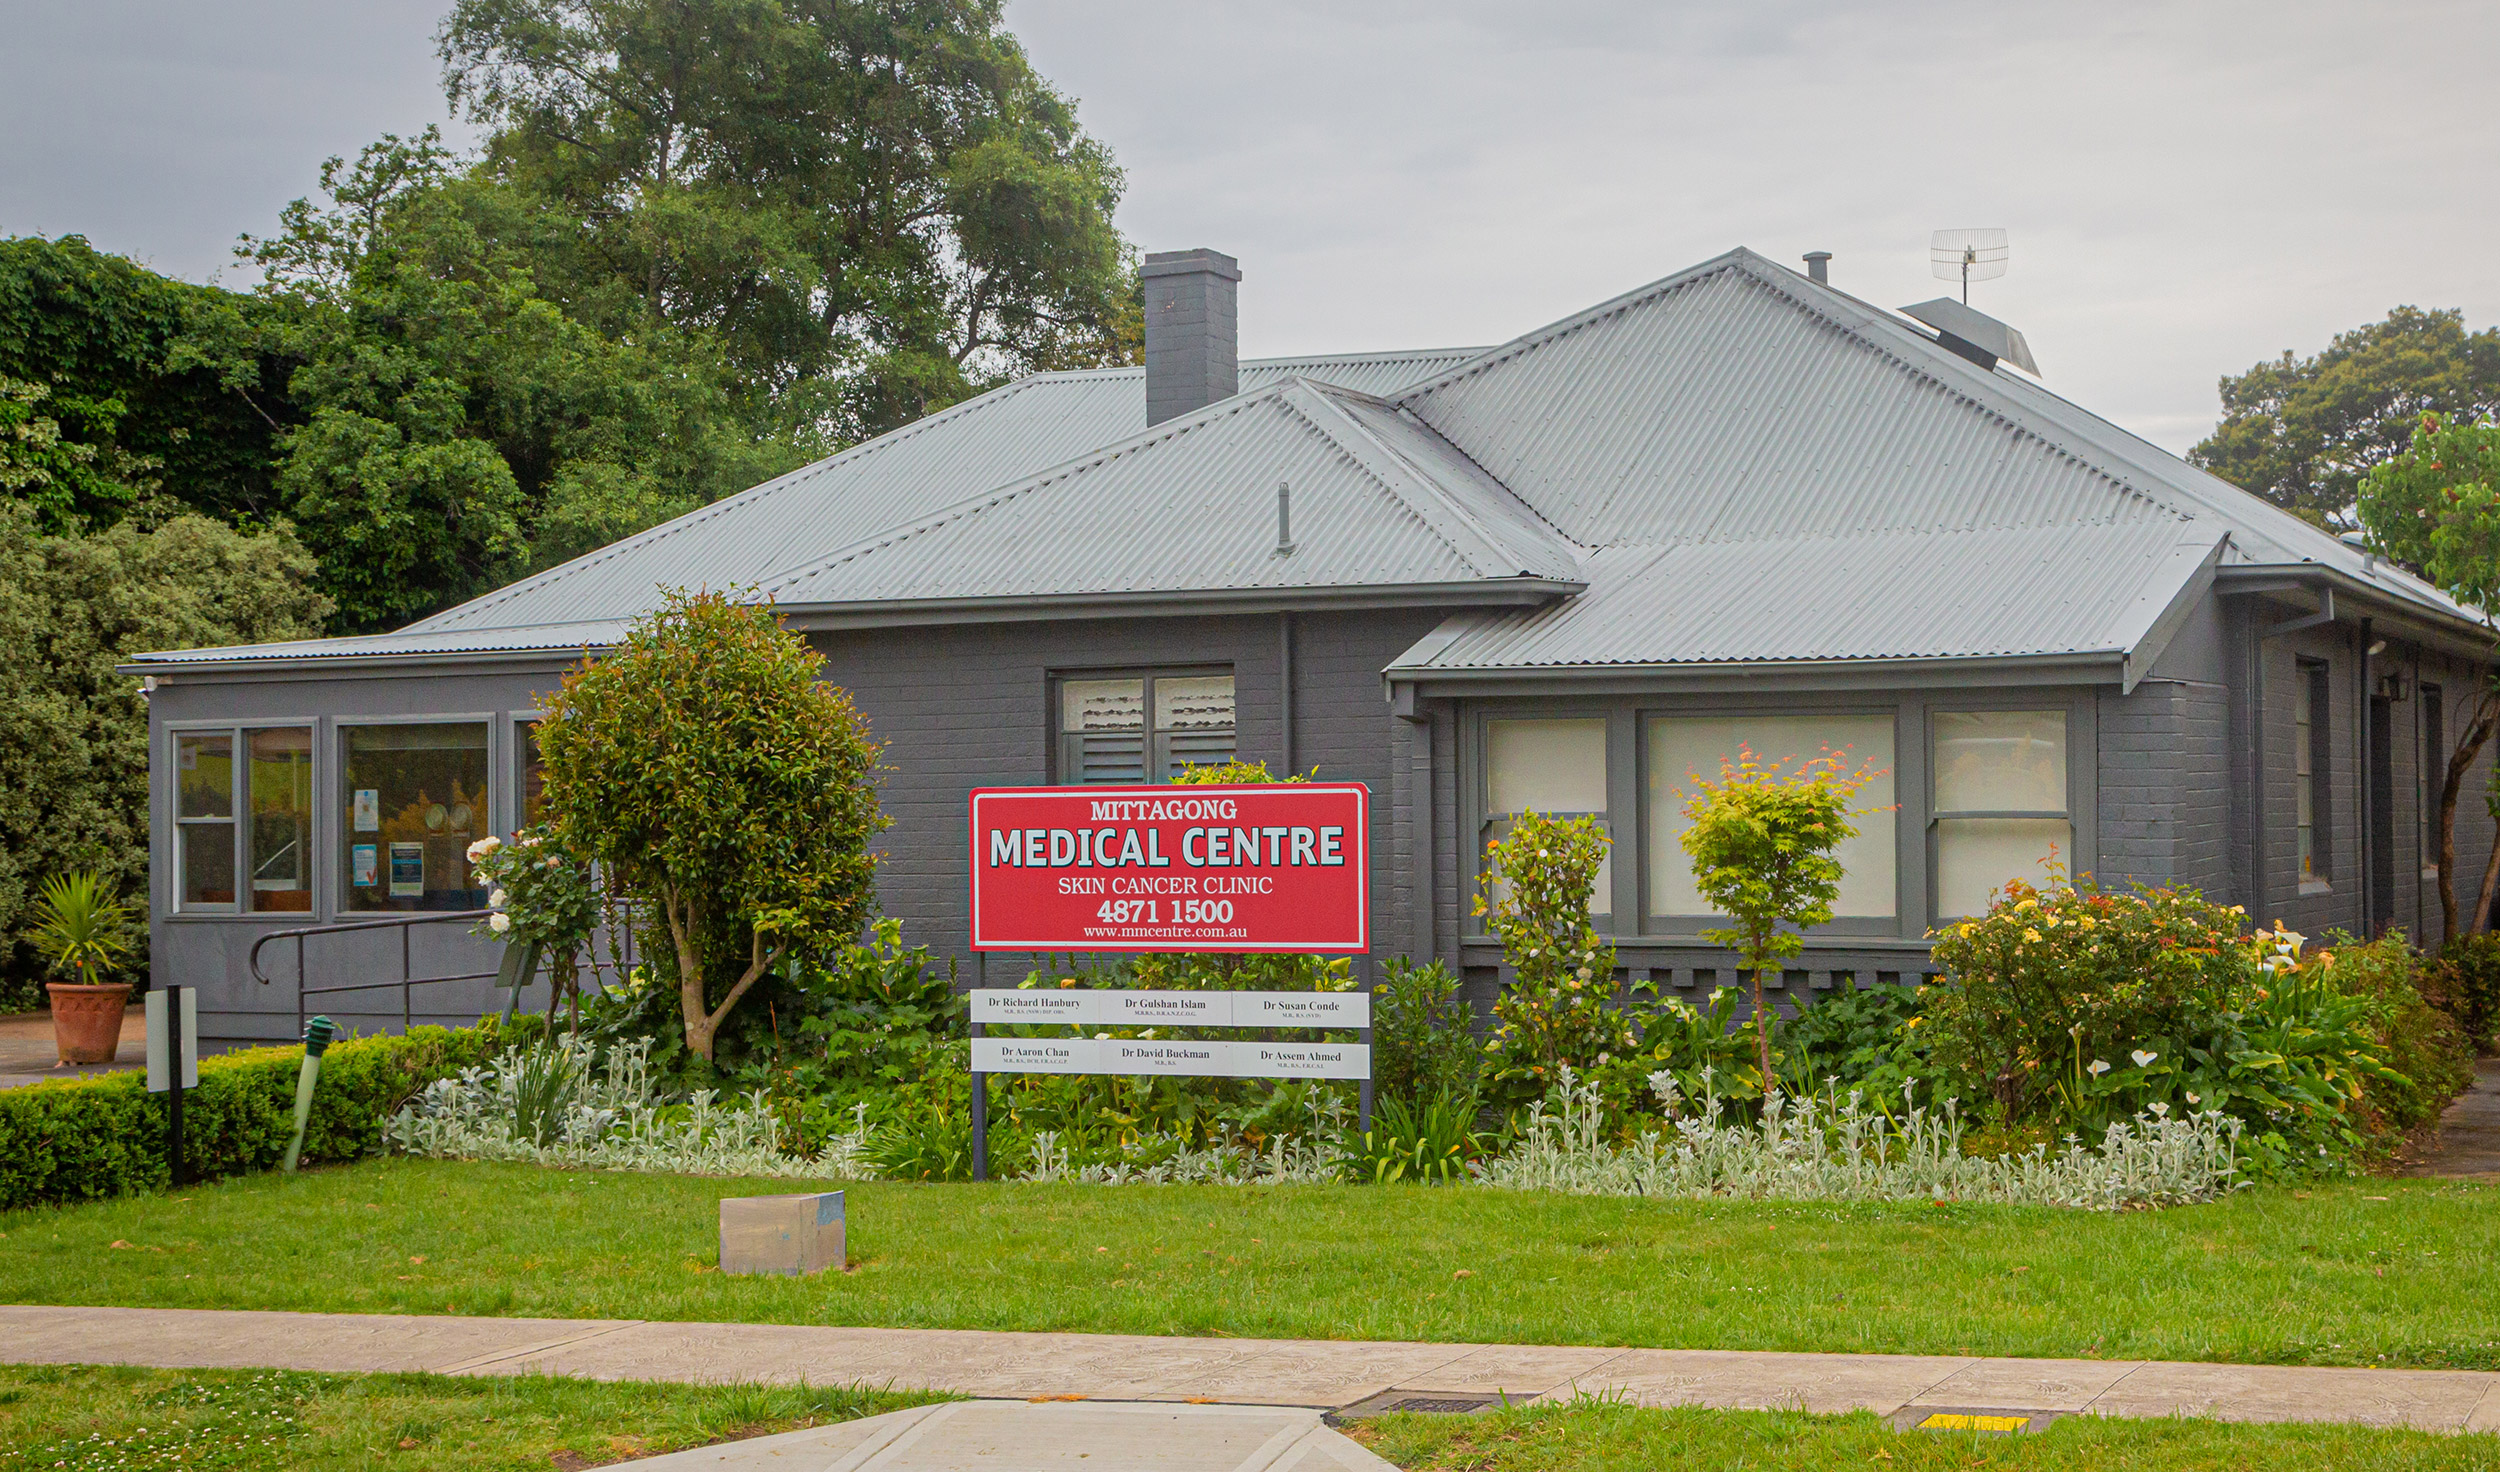 Street view of the Mittagong Medical Centre